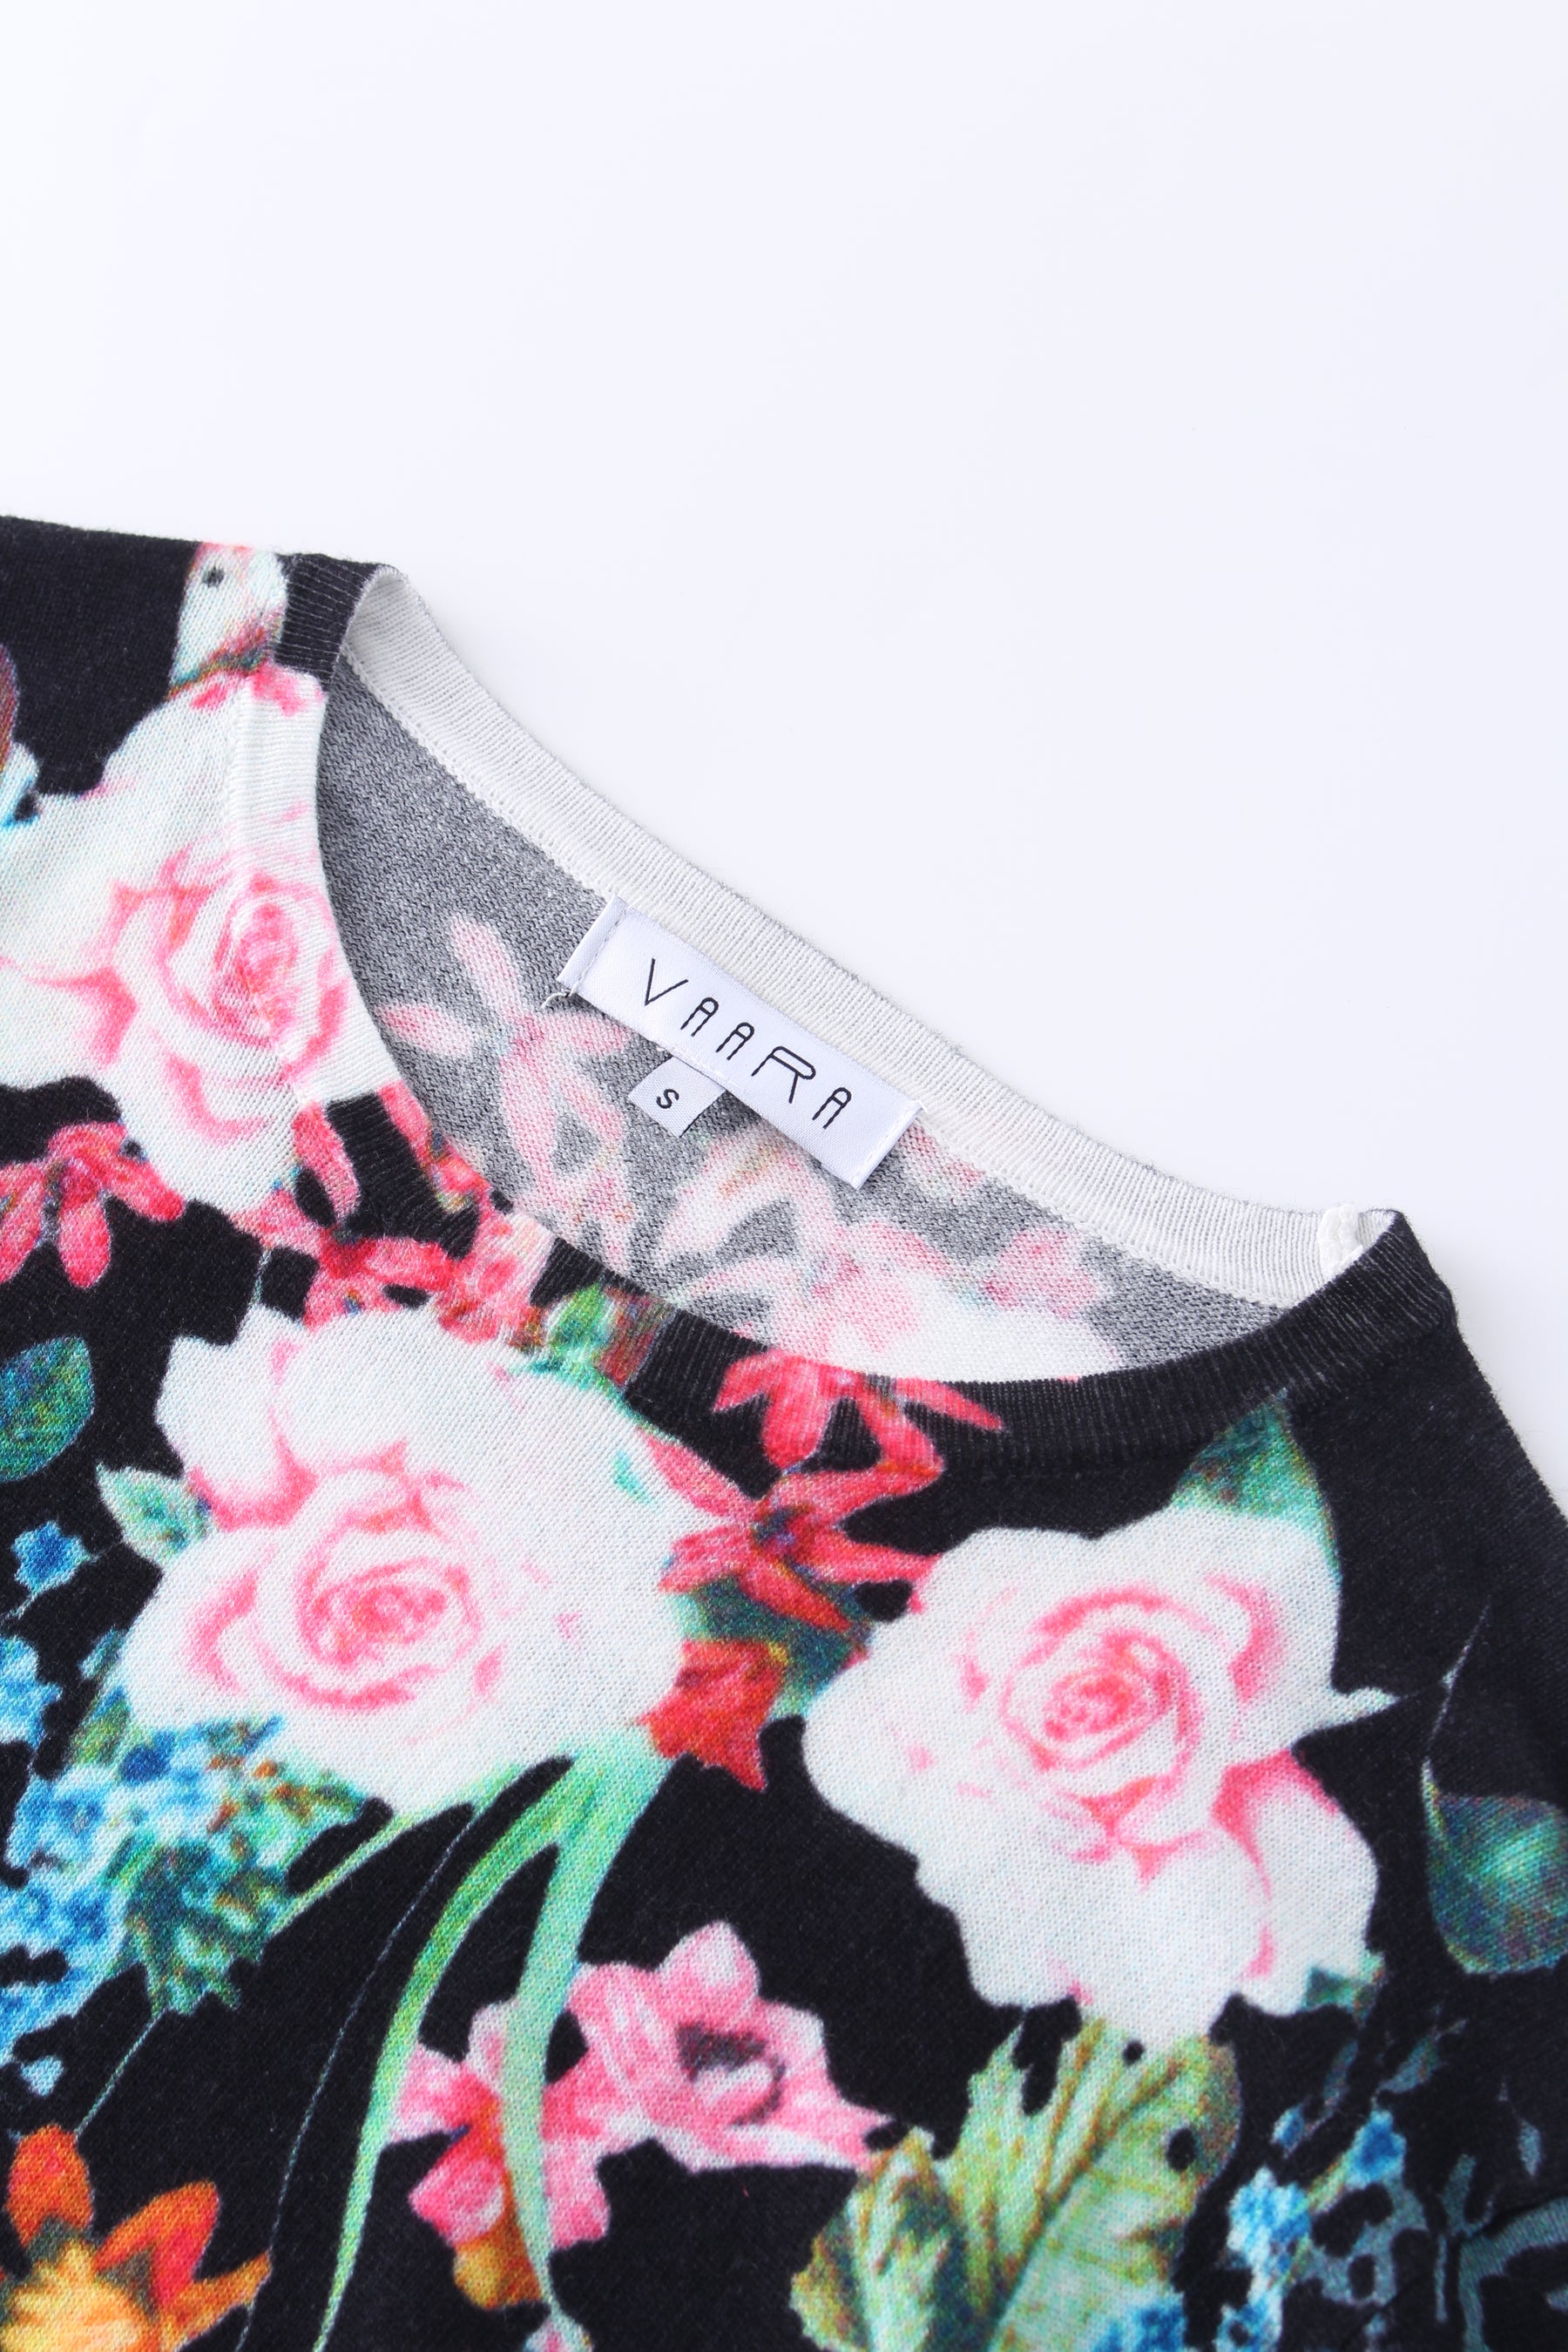 Printed Sweater-Floral